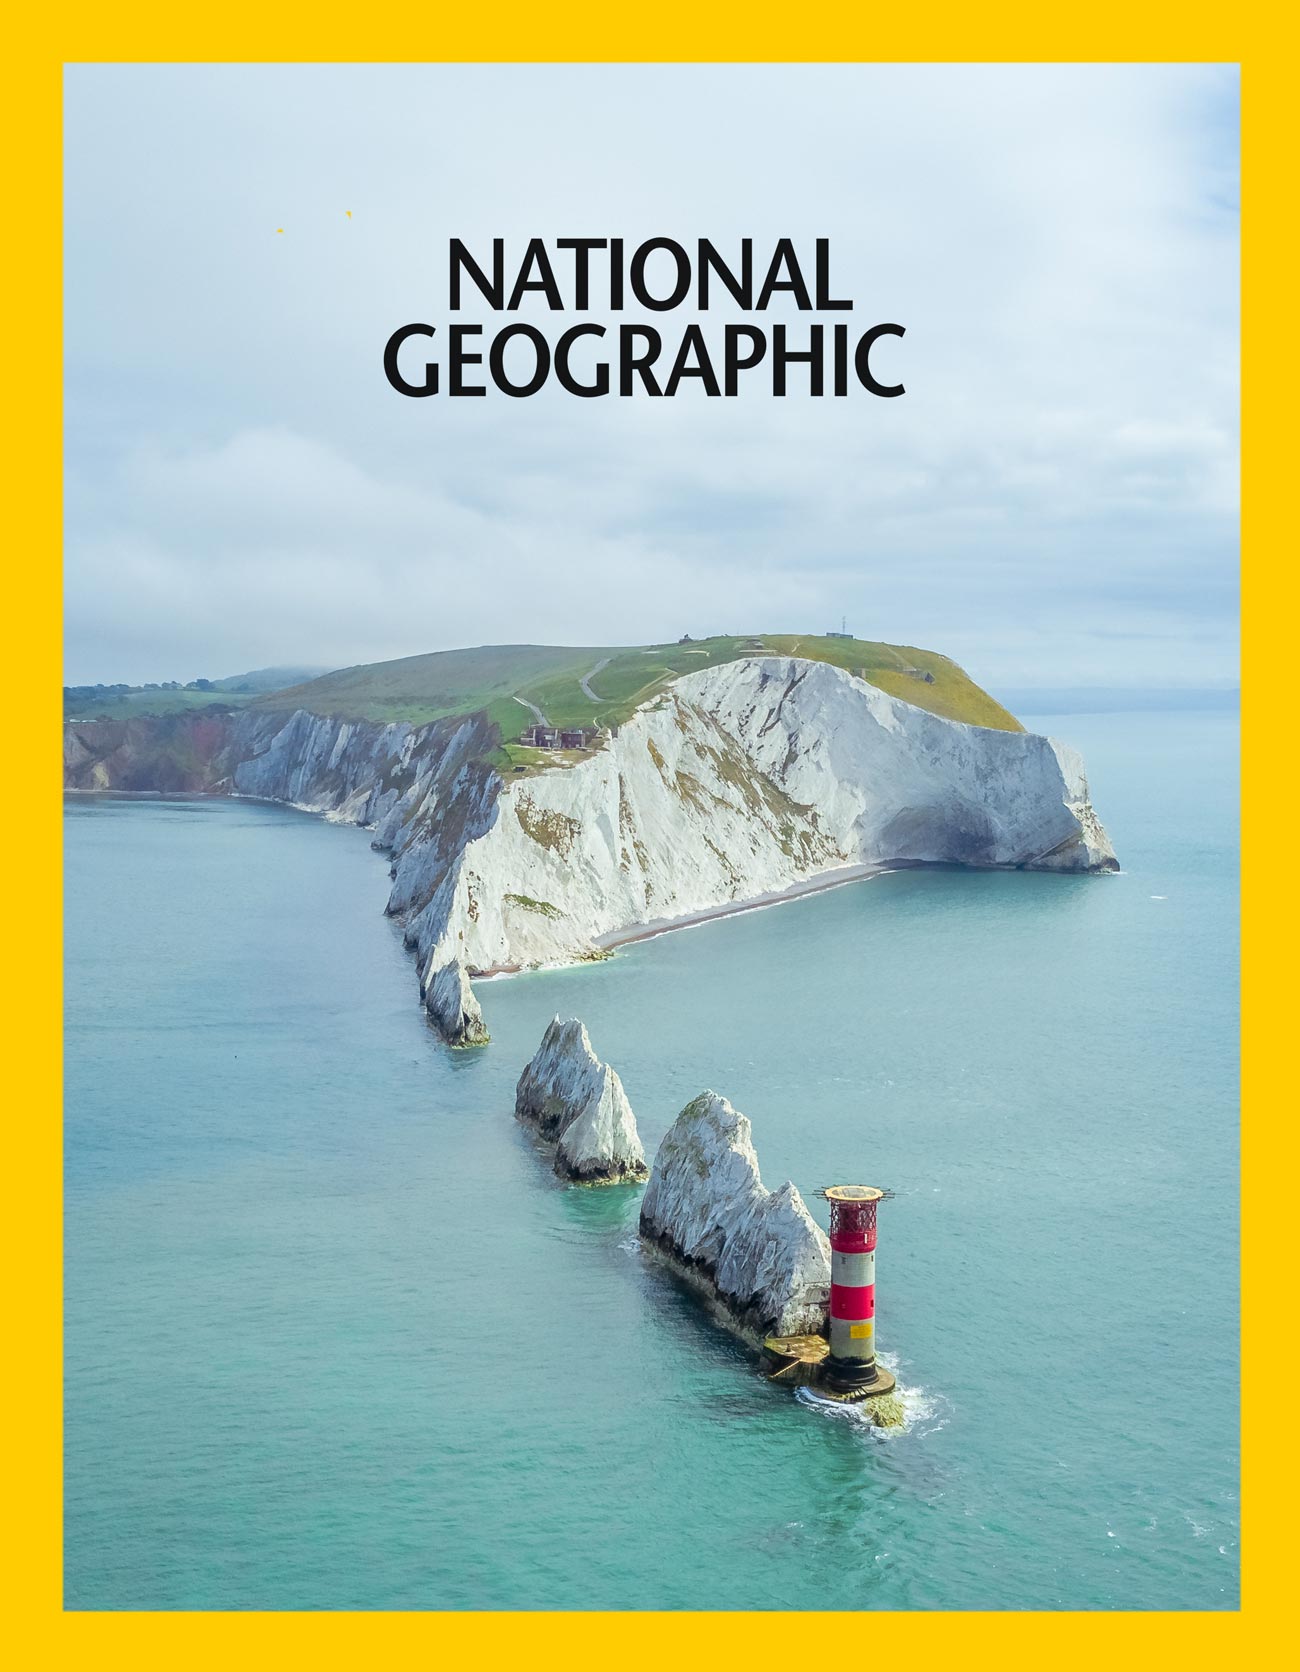 aerial view of the isle of wight with a National Geographic cover